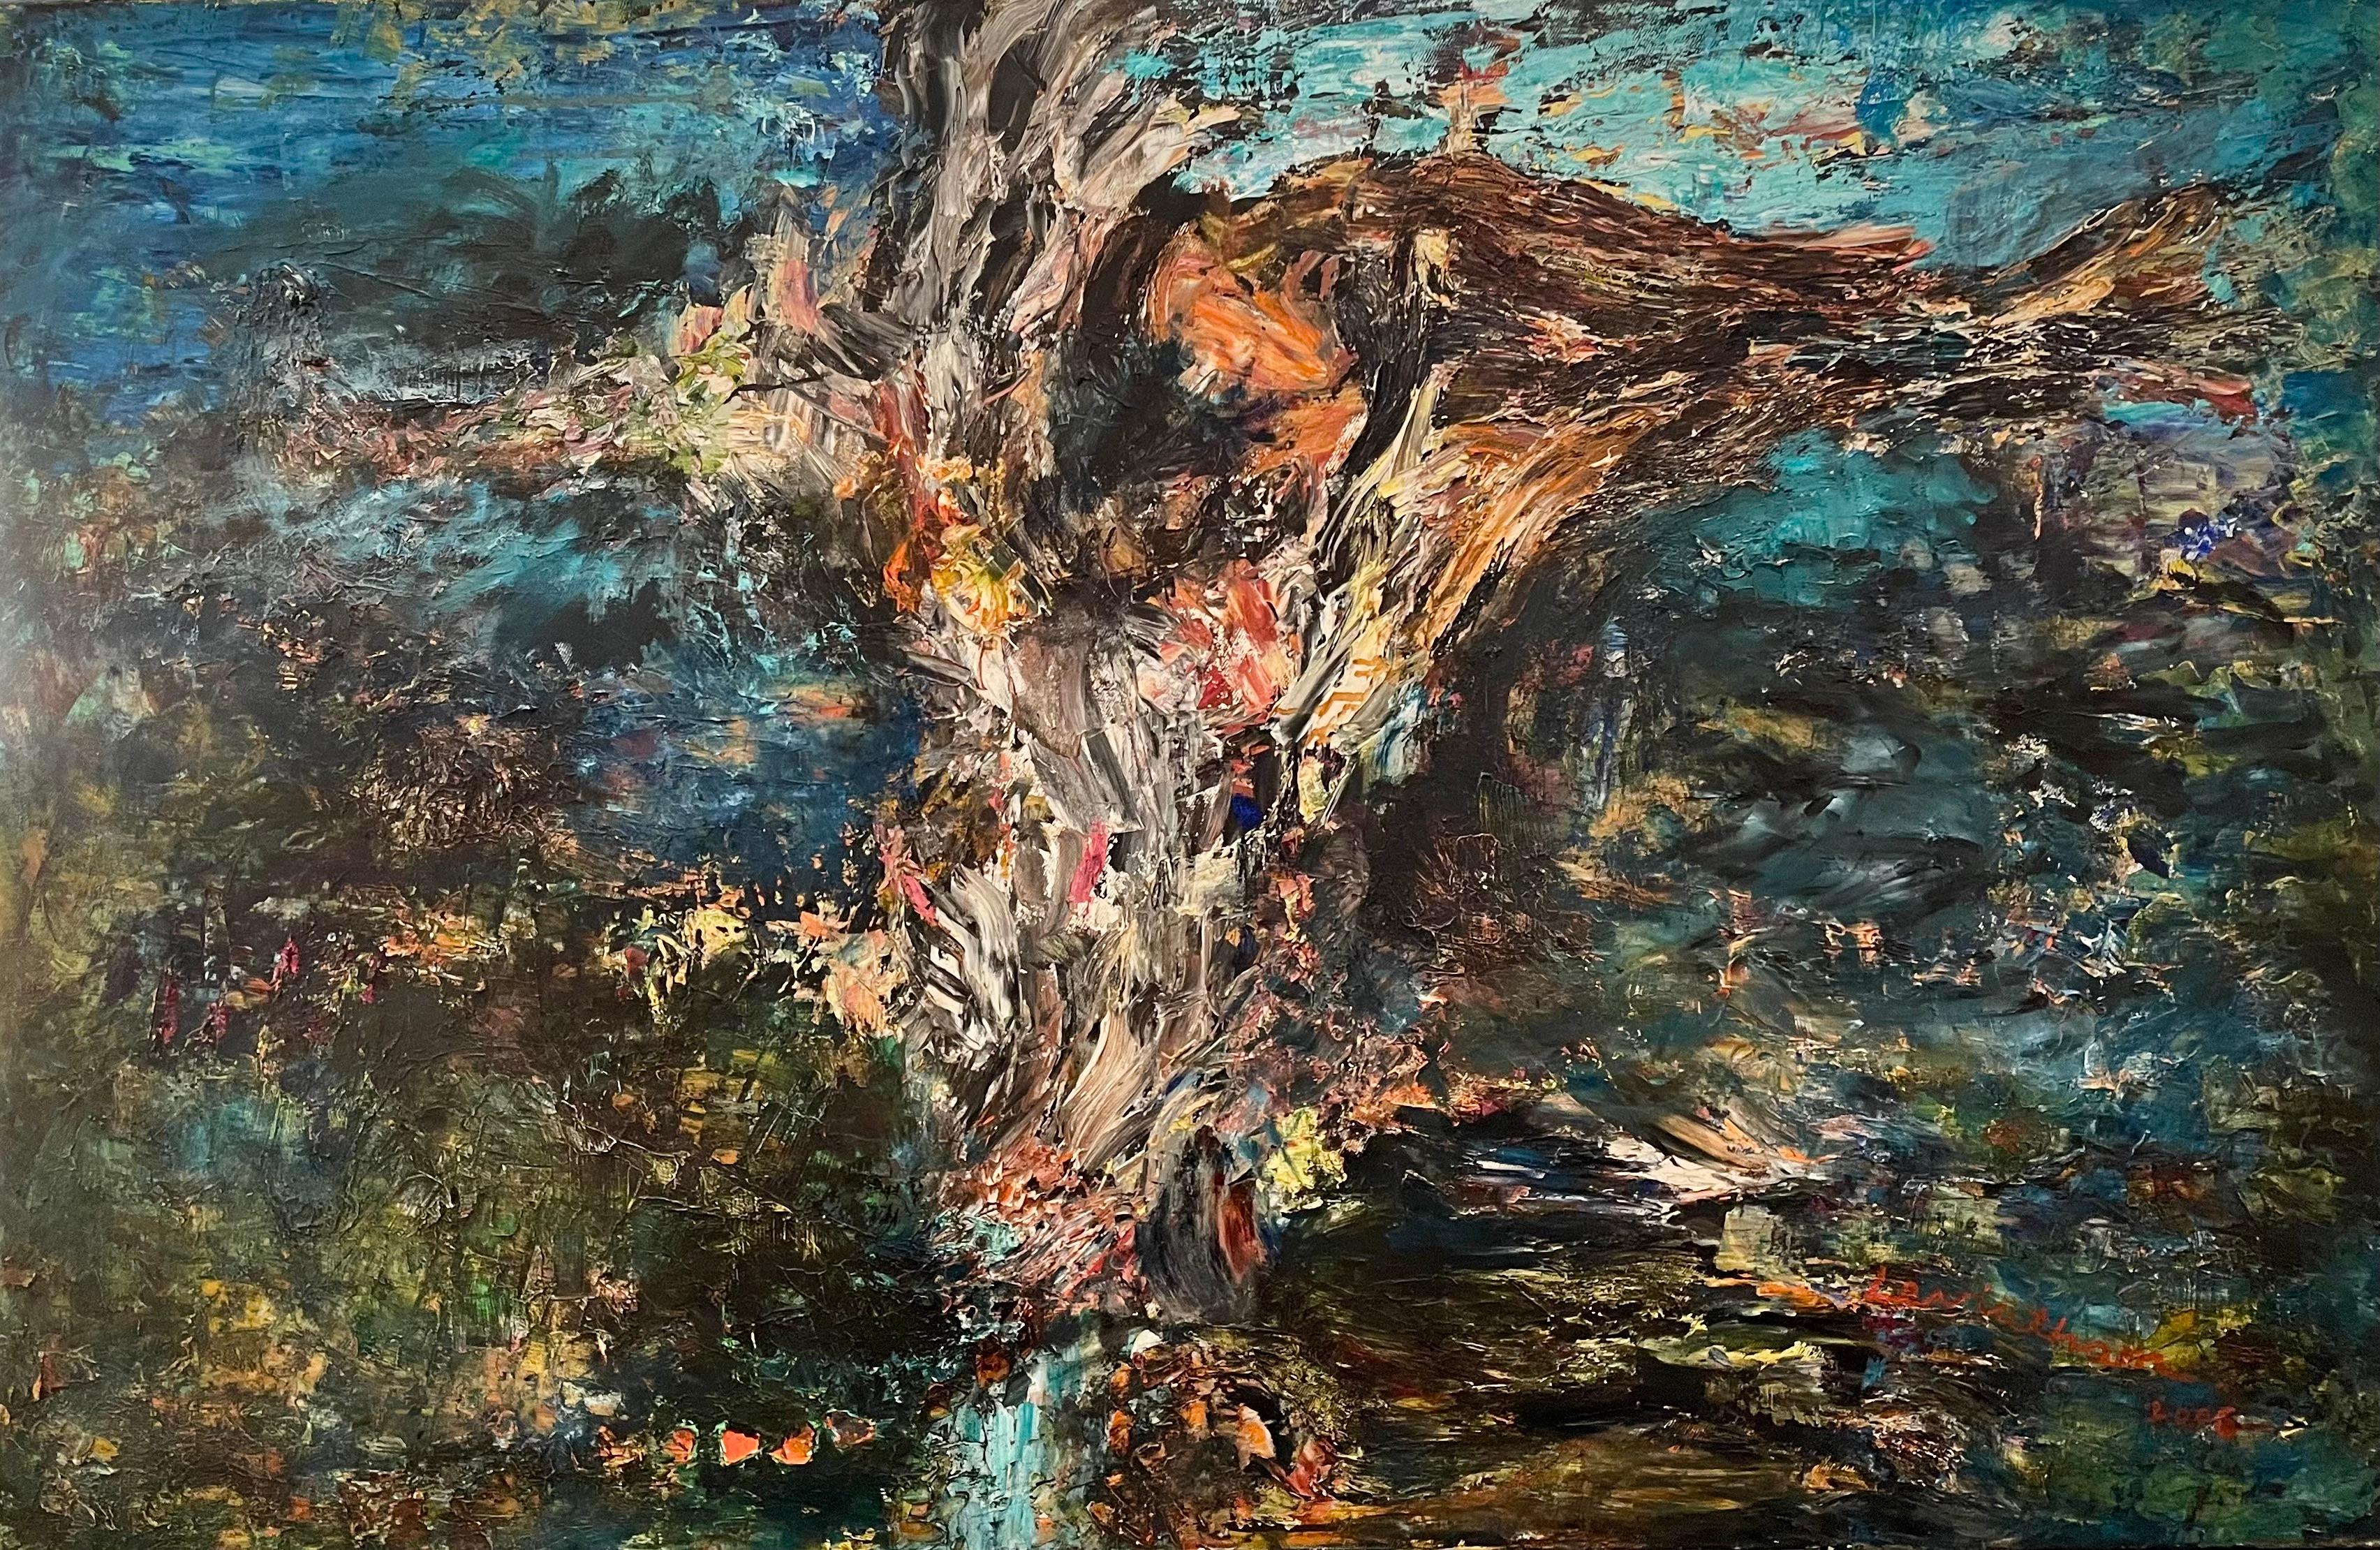 "War Hero" by David Leviathan is a poignant piece that measures 37.5" x 57". As an abstract expressionist work, it captures the tumult of battle and the solitude of valor through its intense, contrasting colors and dynamic brushstrokes. The deep